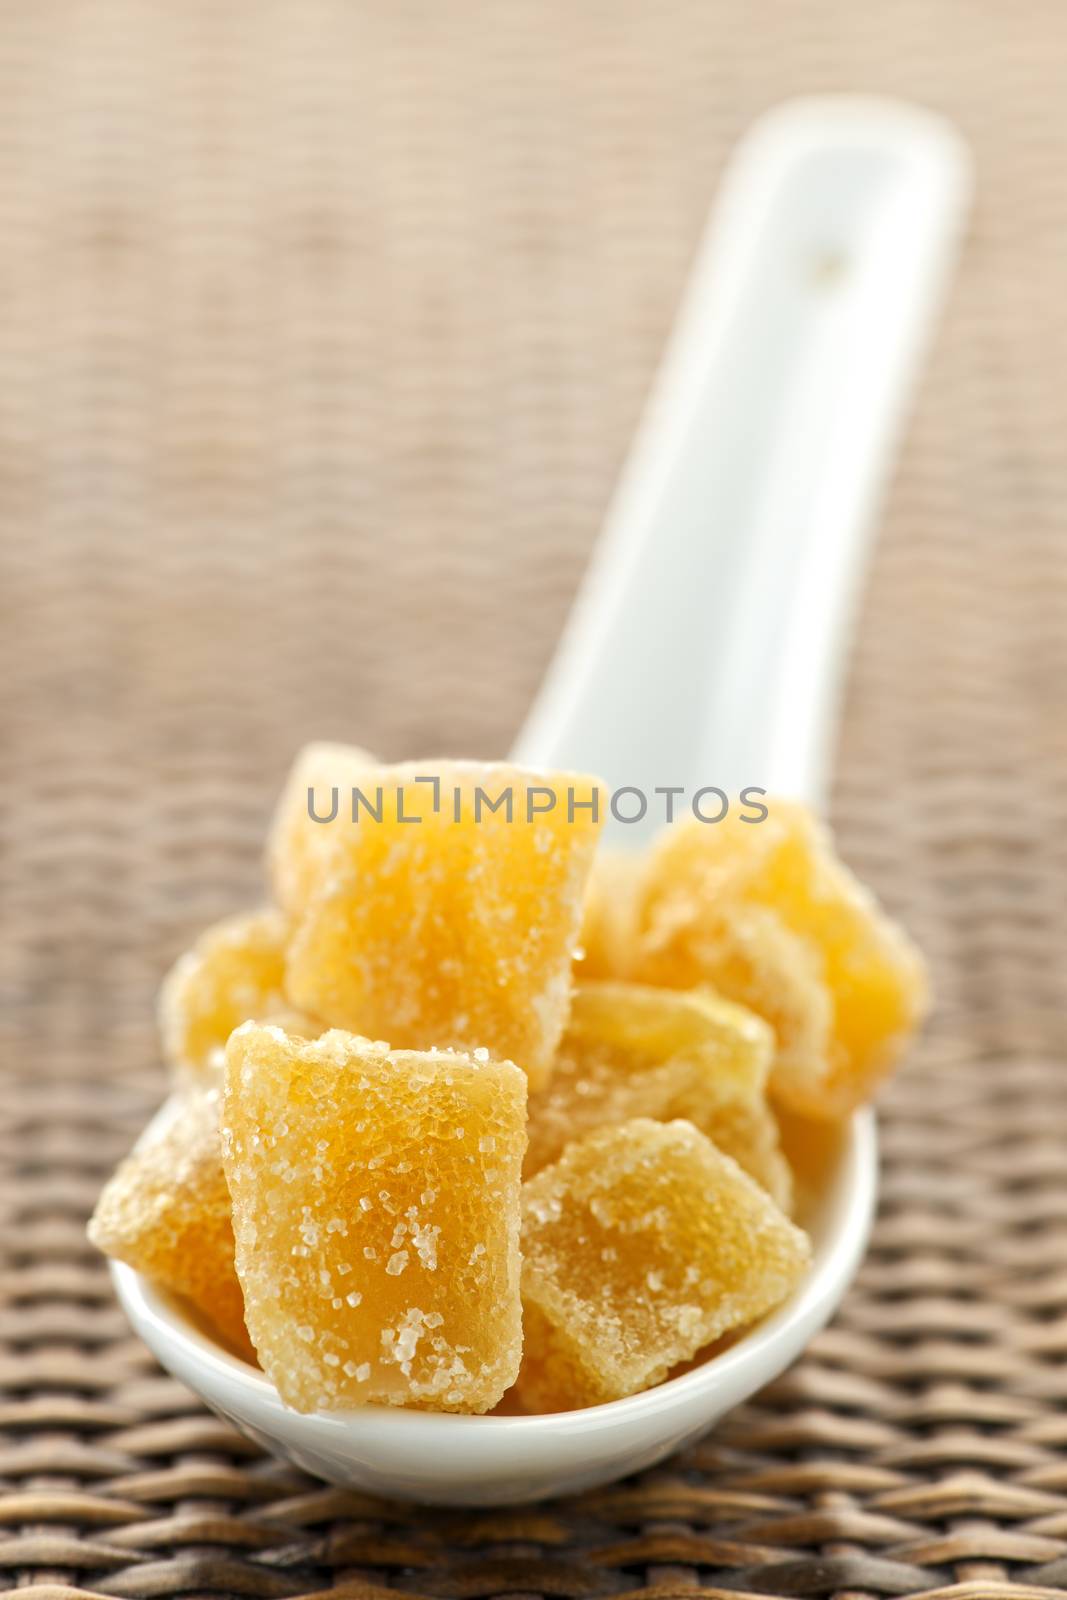 Candied ginger pieces in spoon by elenathewise